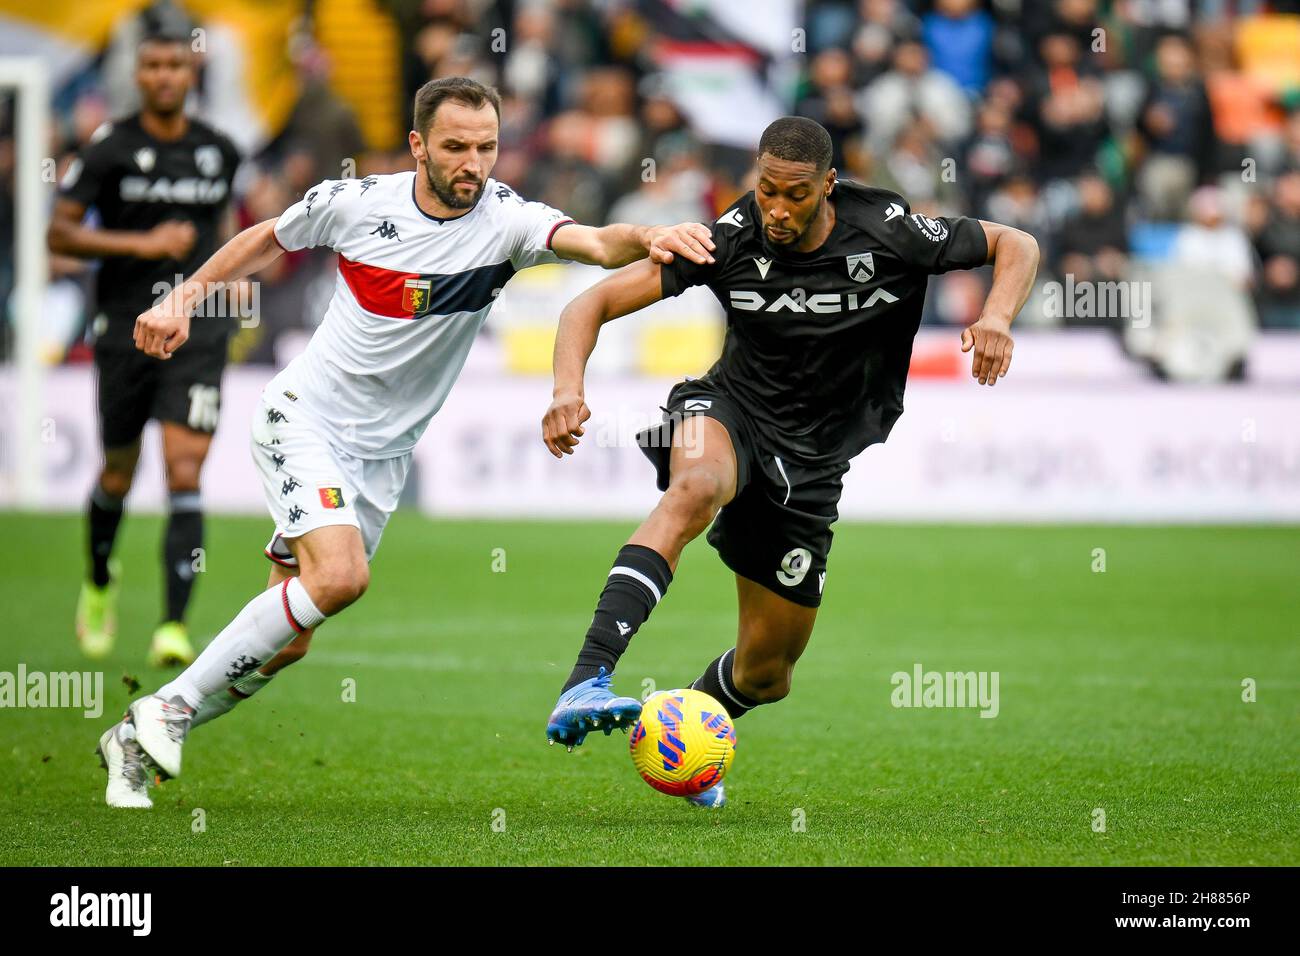 Udine, Italy. 28th Nov, 2021. Norberto Bercique Gomes Betuncal (Udinese) hindered by Milan Badelj (Genoa) during Udinese Calcio vs Genoa CFC, italian soccer Serie A match in Udine, Italy, November 28 2021 Credit: Independent Photo Agency/Alamy Live News Stock Photo